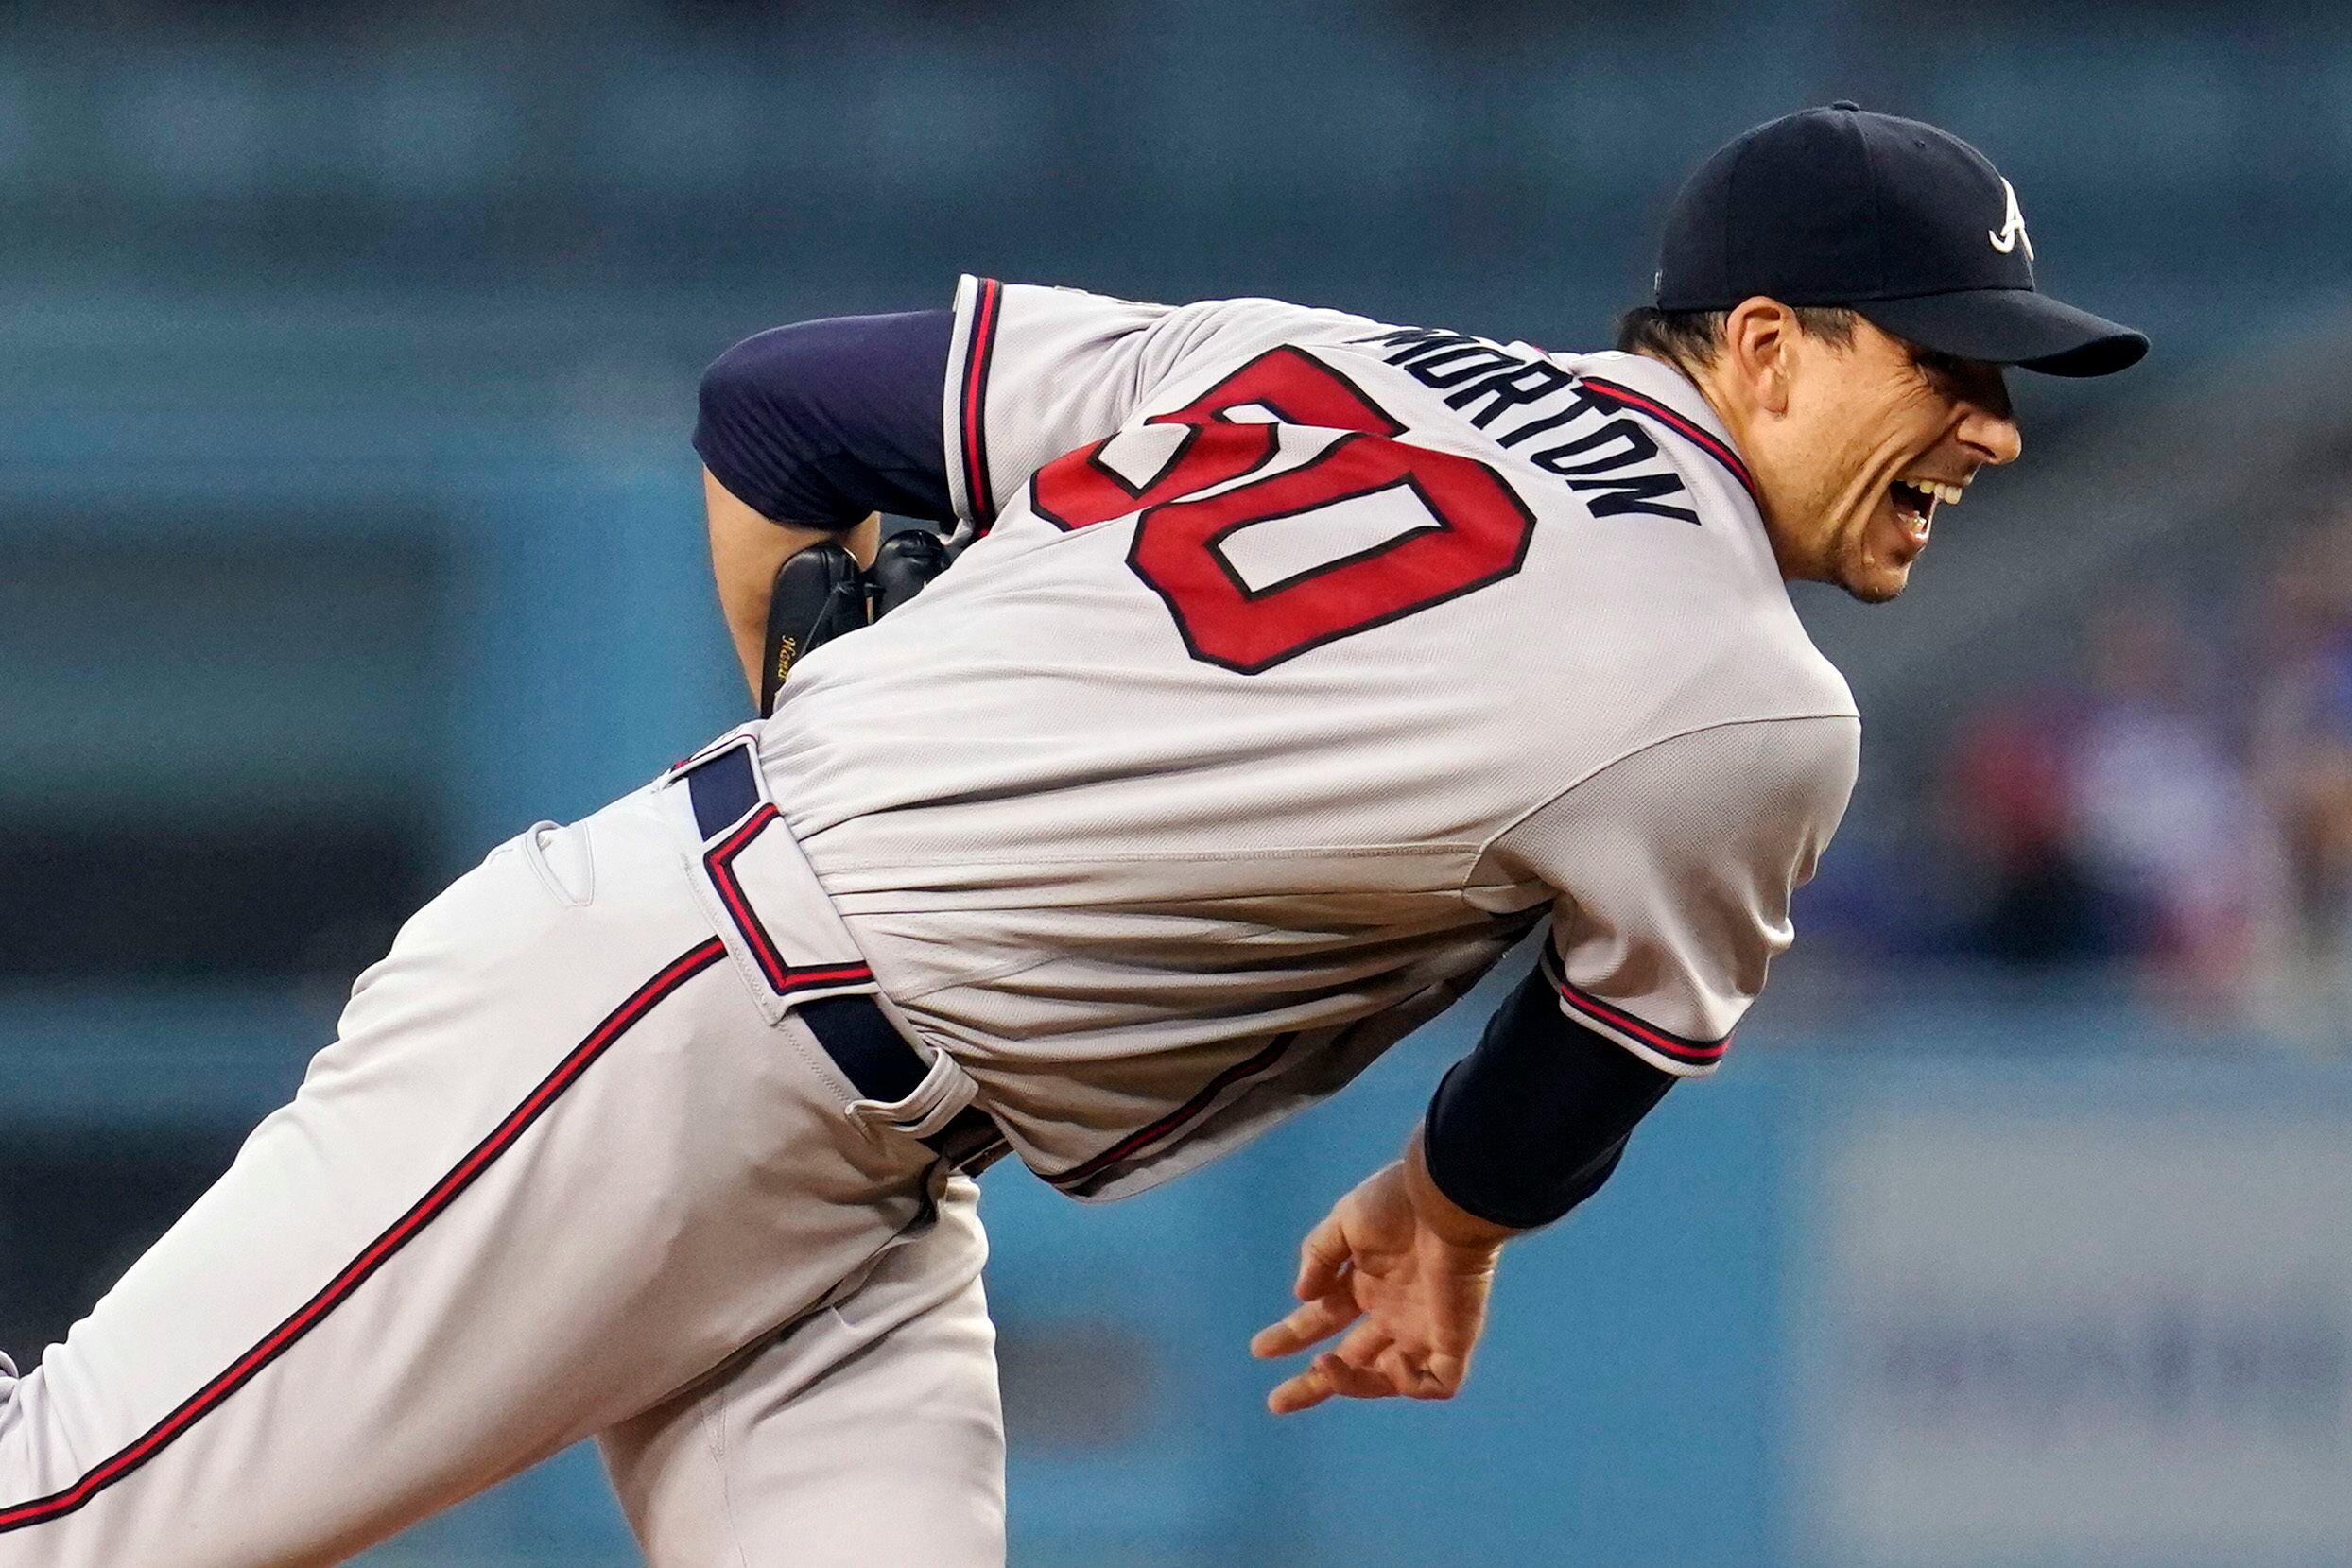 Braves] The Atlanta #Braves today signed RHP Charlie Morton to a